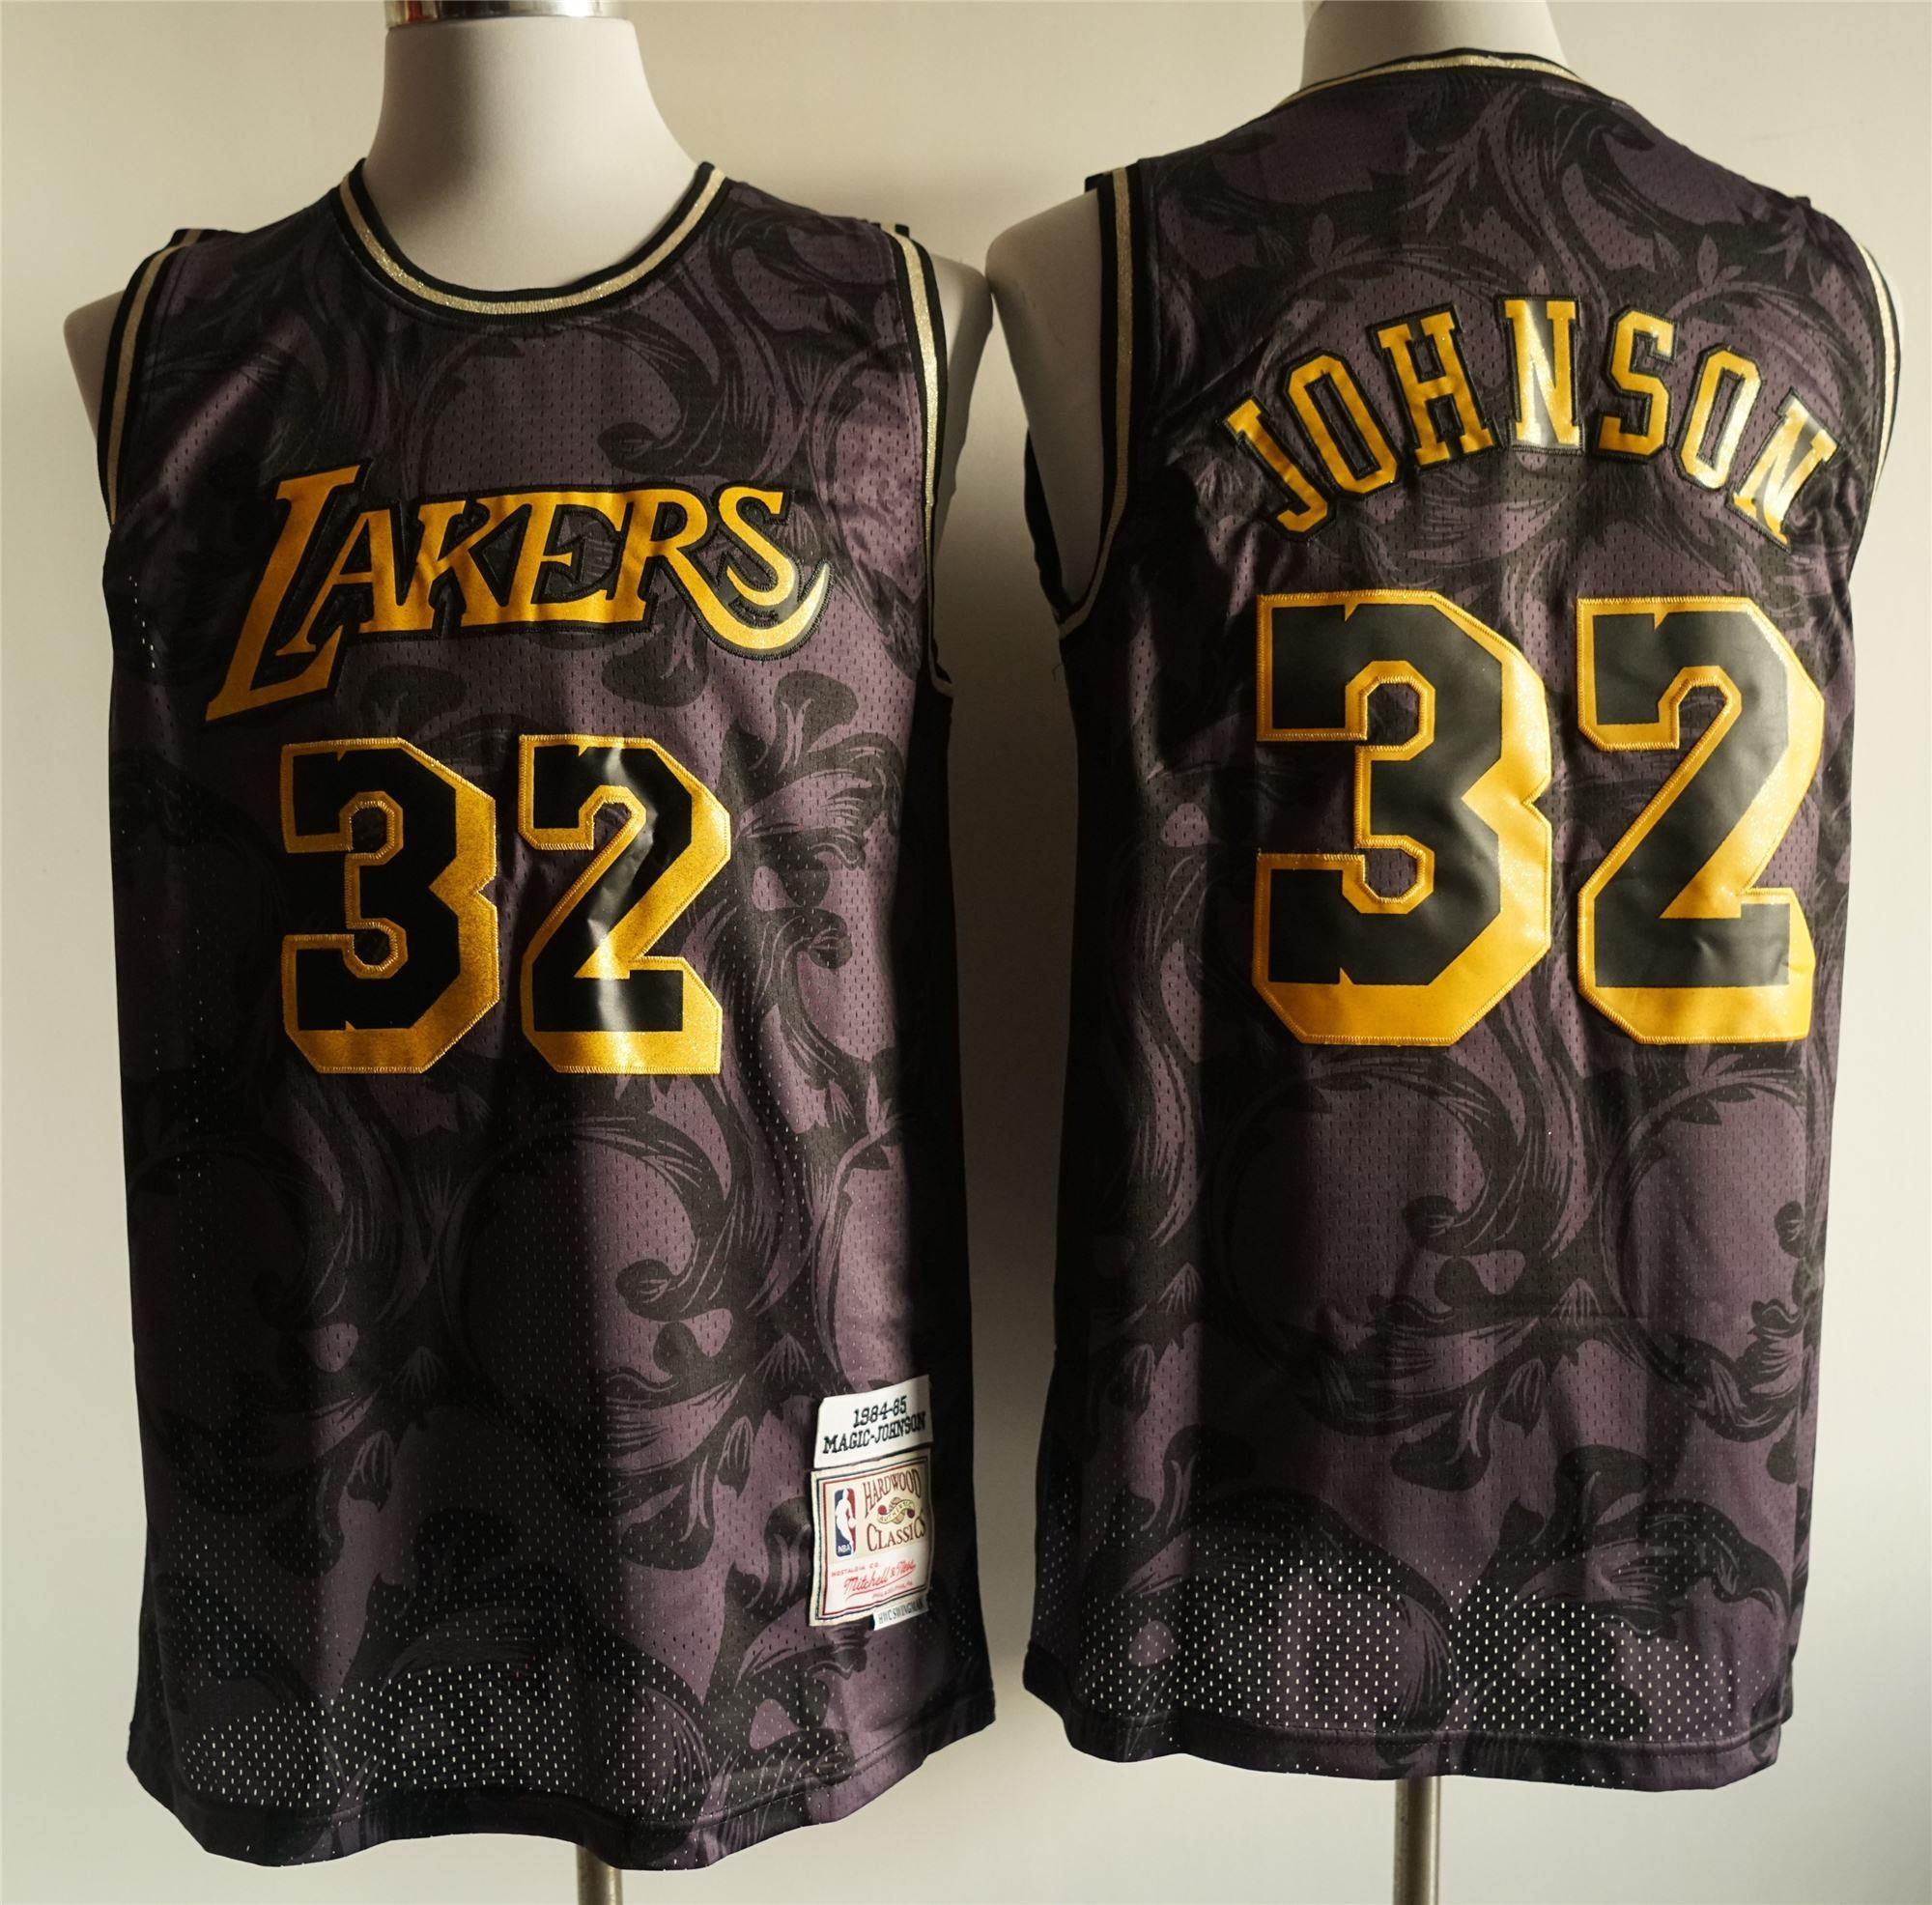 32 lakers jersey